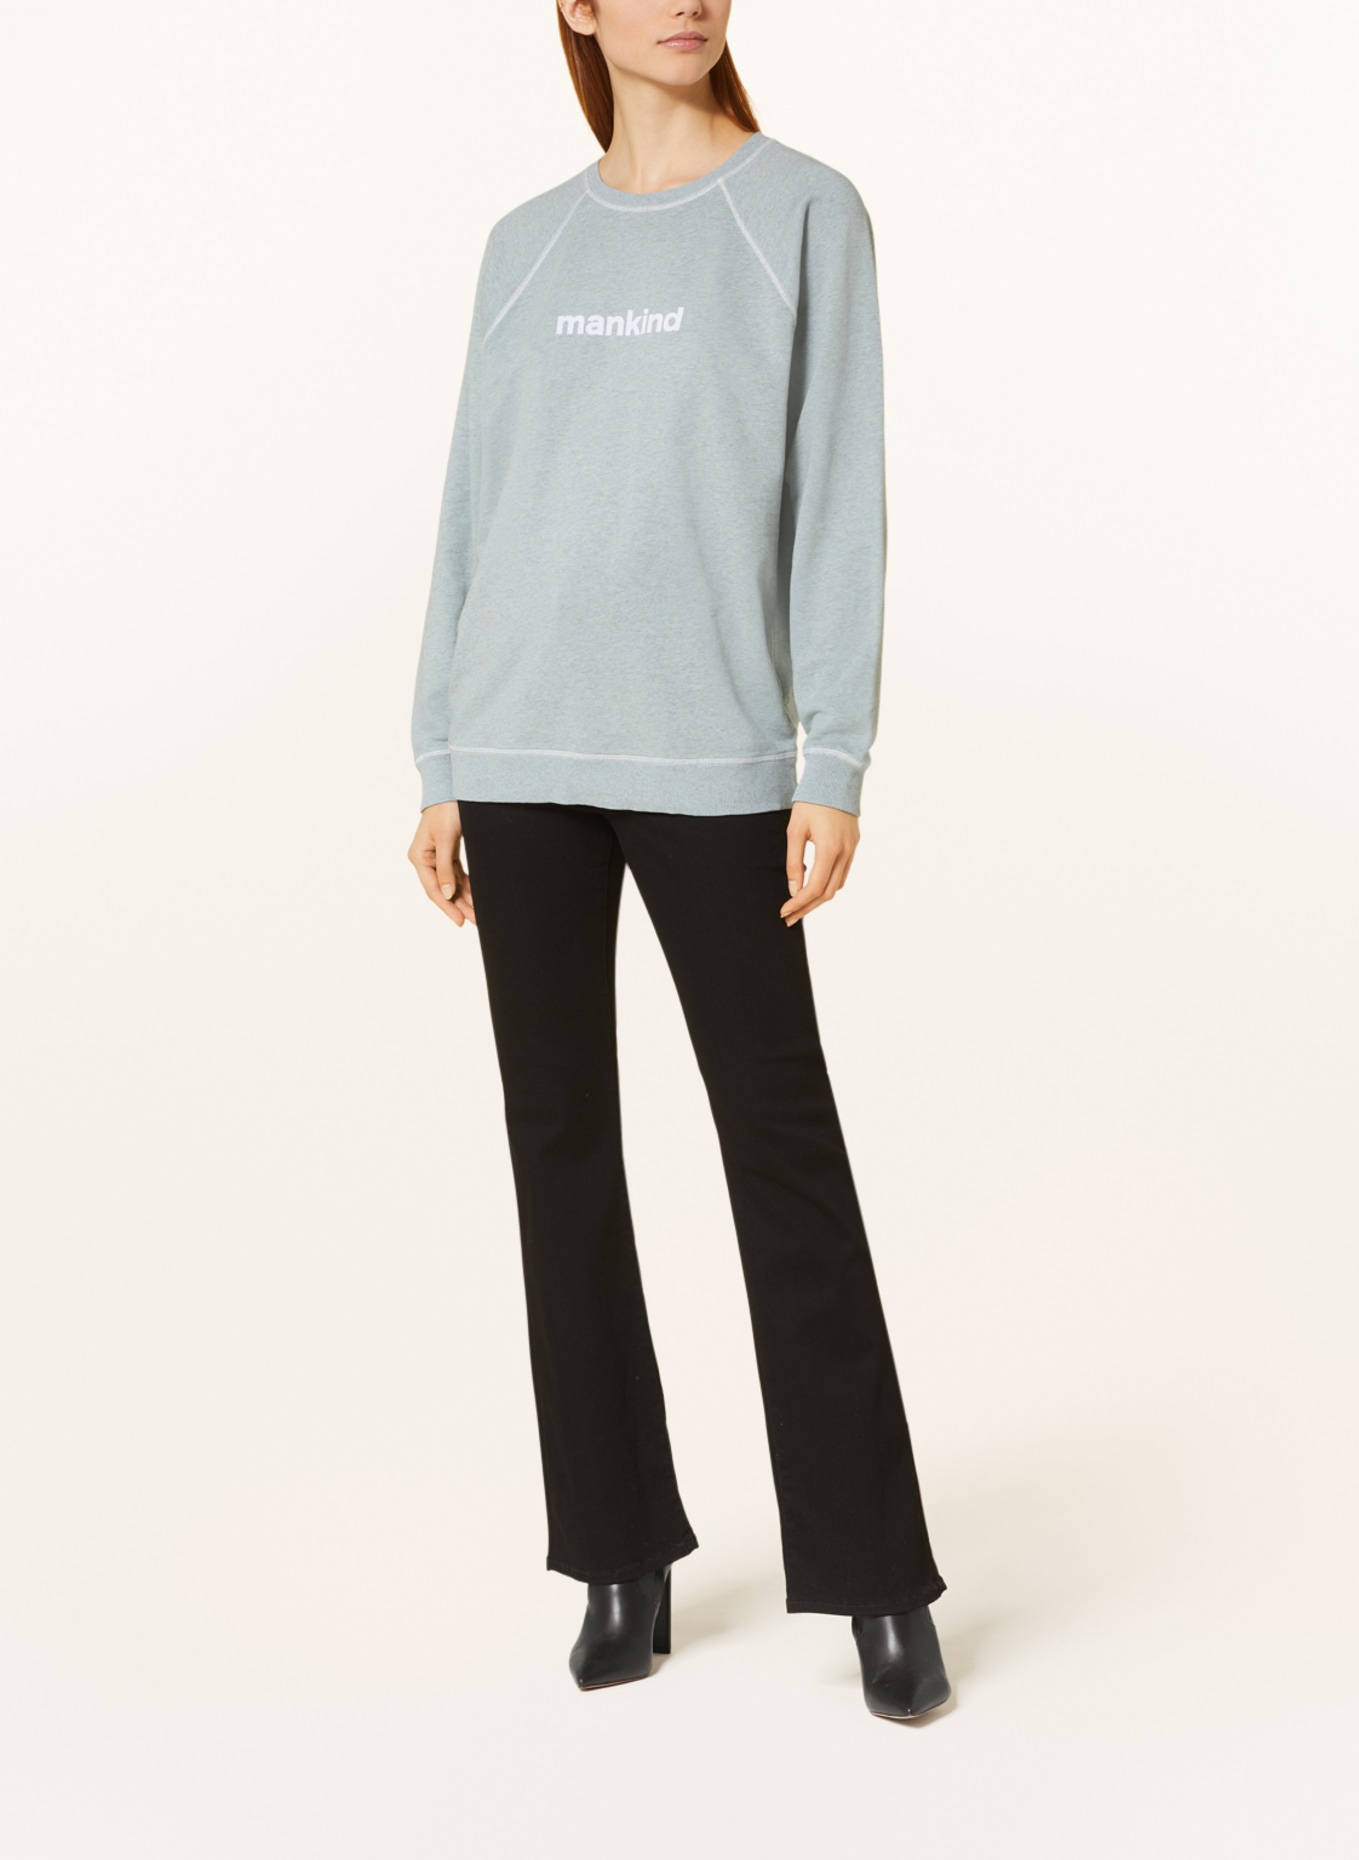 7 for all mankind Sweatshirt, Color: GRAY (Image 2)